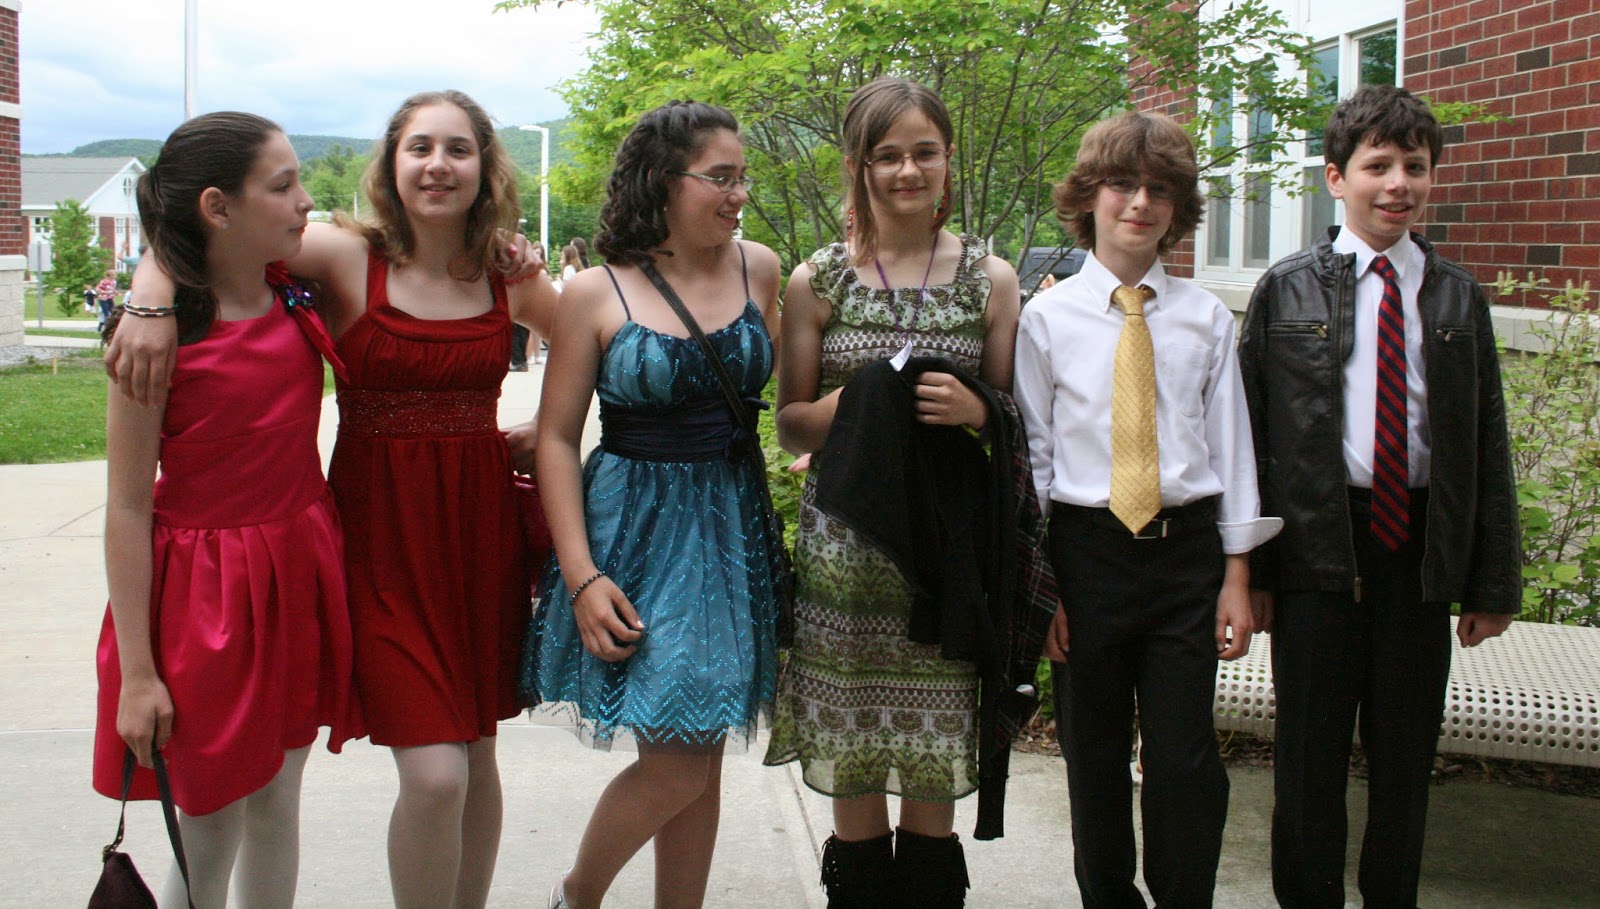 Our Middle School Semi-Formal Dress up Dance!